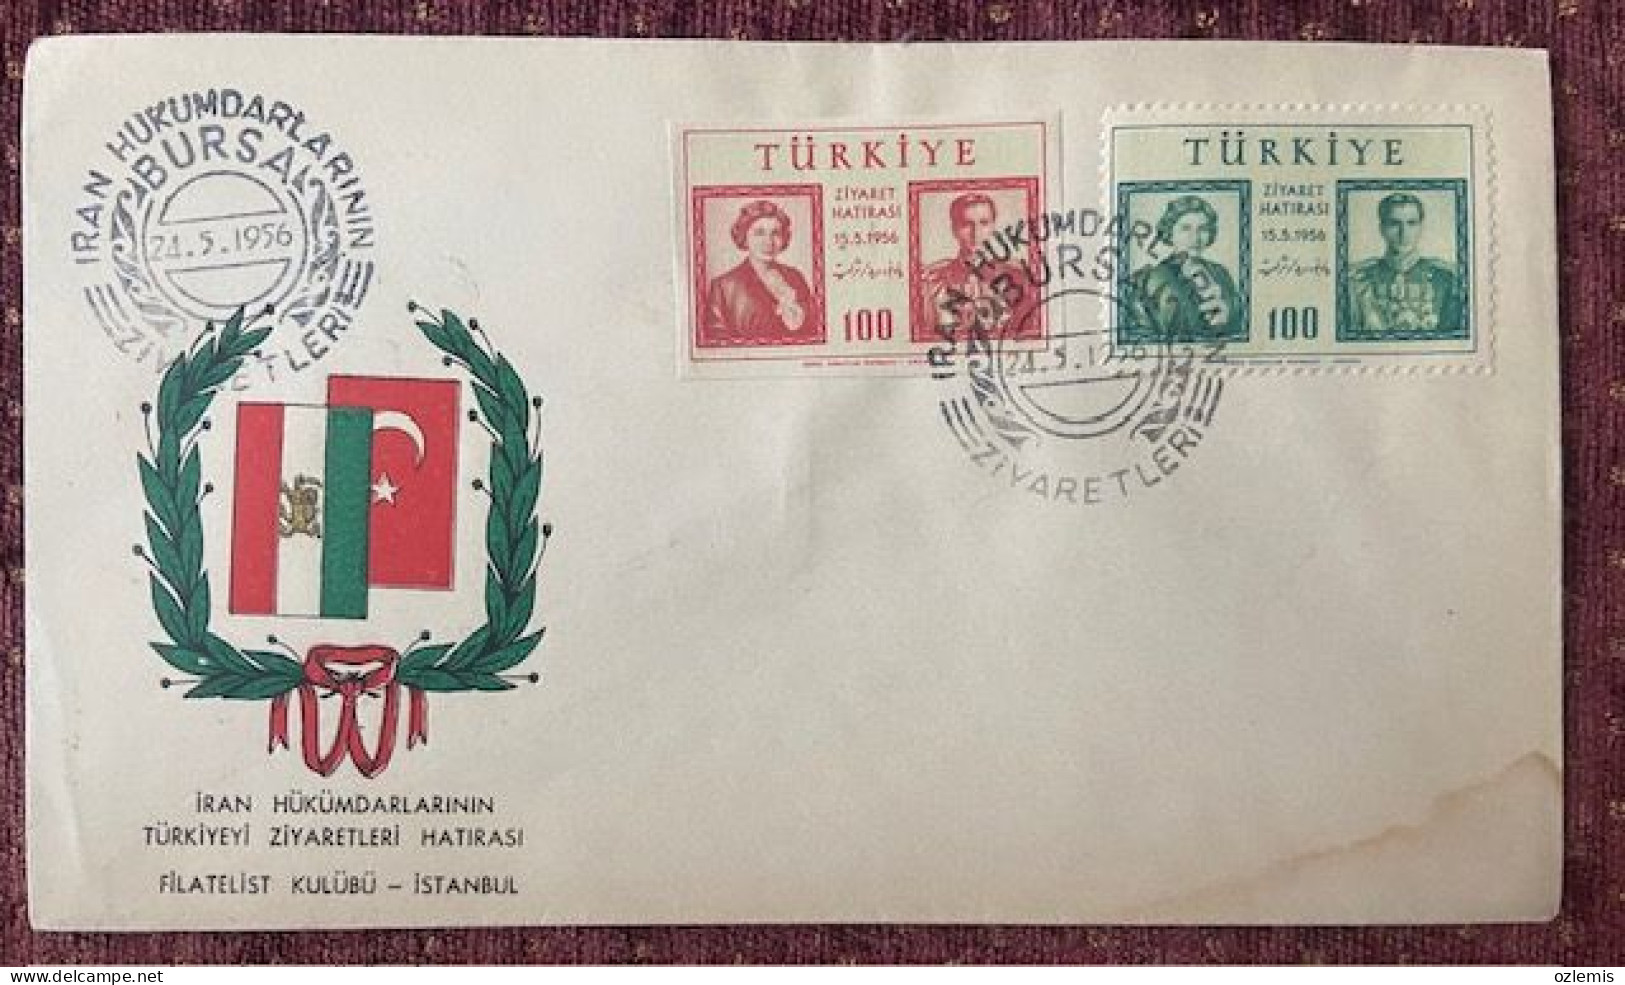 TURKEY,TURKEI,TURQUIE , MEMORY OF ,IRAN'S,VISITS TO TURKEY ,1956 ,COVER - Lettres & Documents